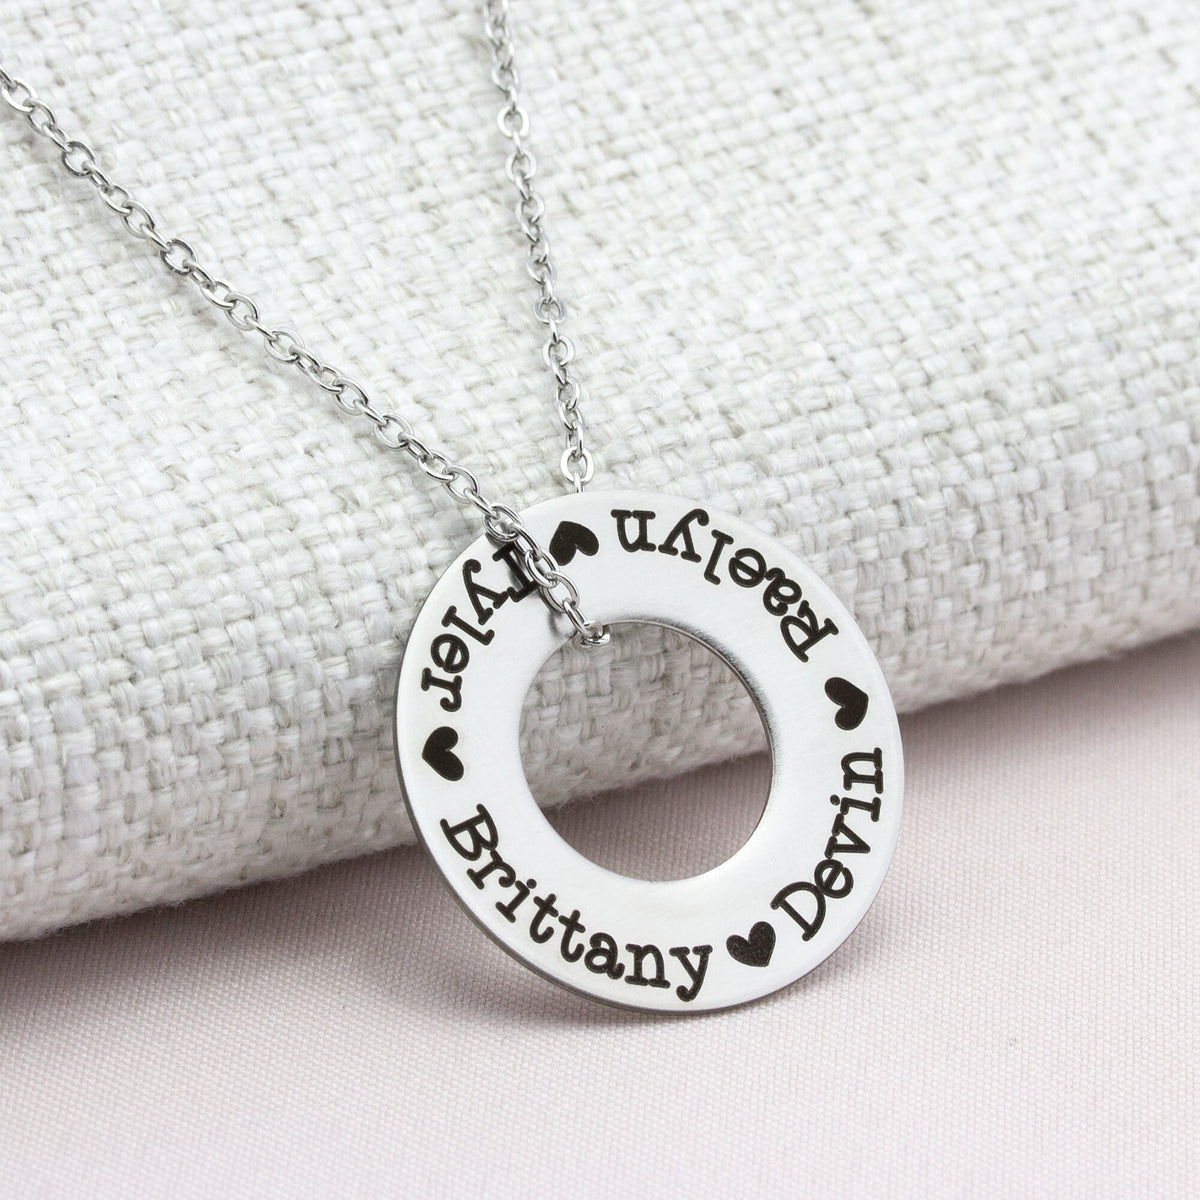 Custom Circle Name Necklace, Mother Necklace with Kids Names, Engraved Washer Necklace, Personalized Mothers Day Gift, Gifts for Mom